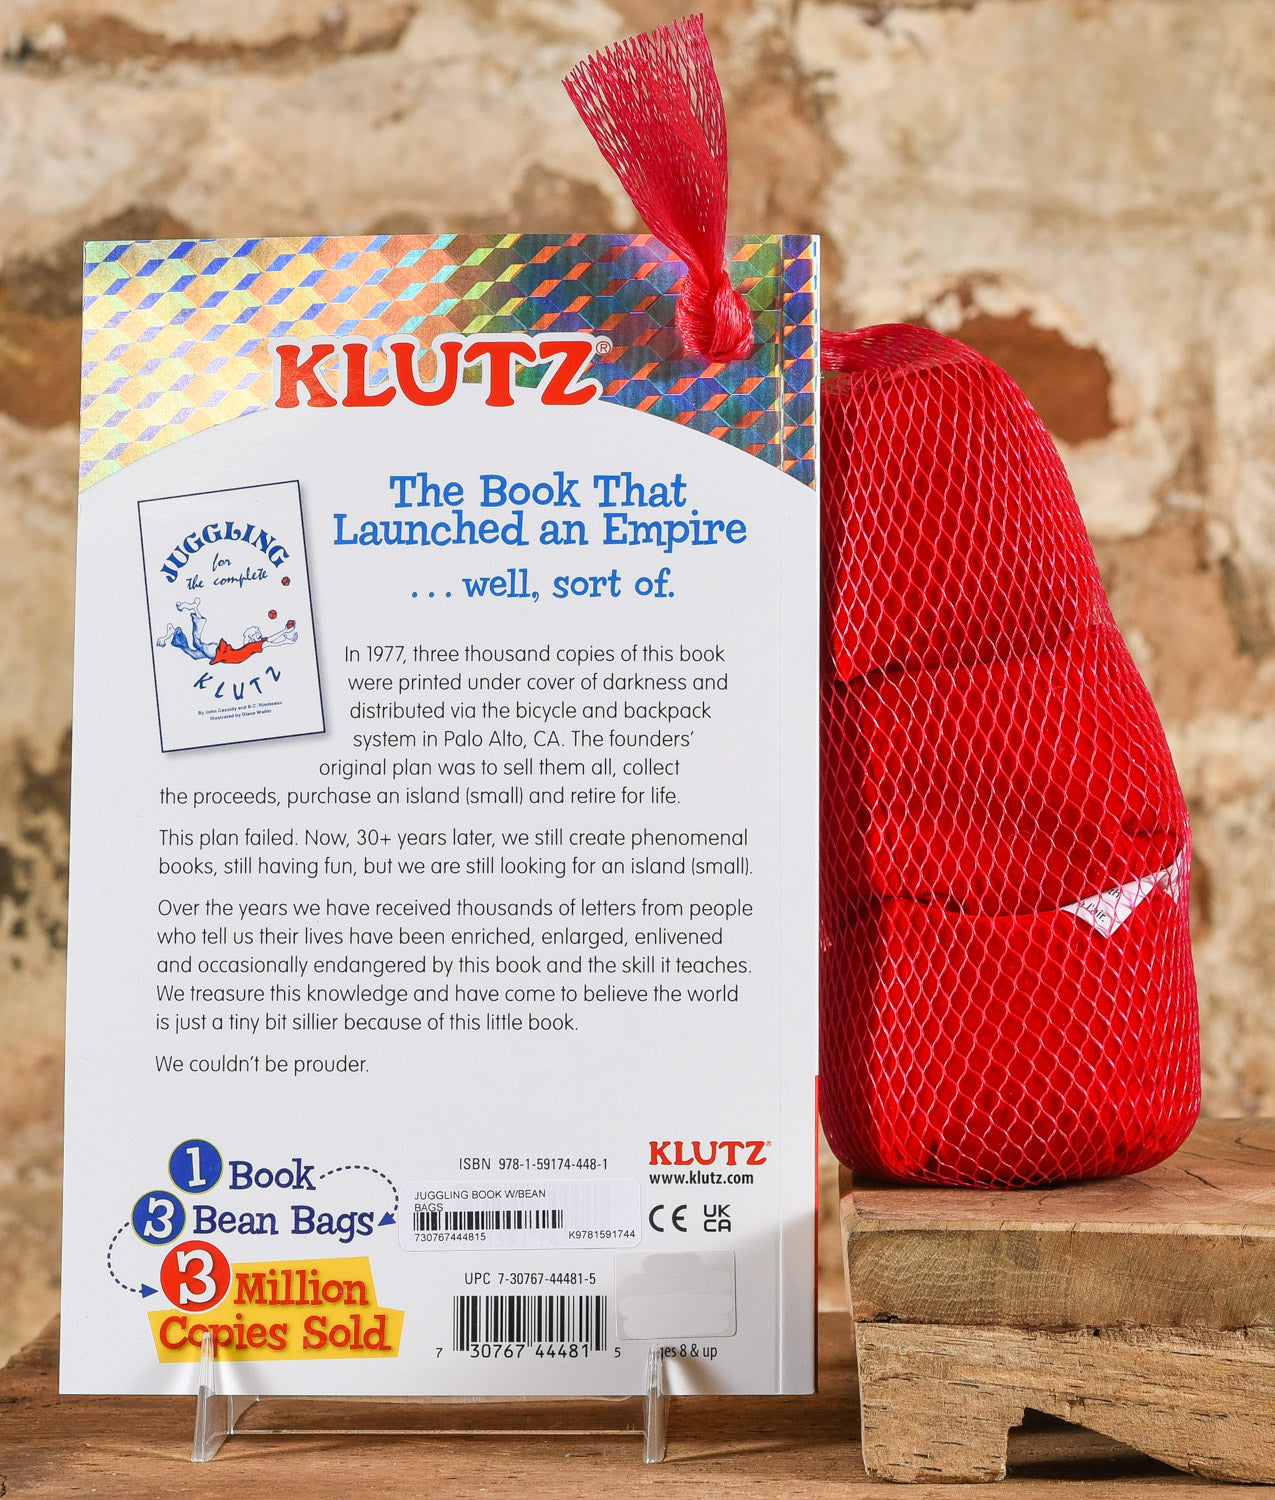 Juggling for the Complete Klutz [Book]